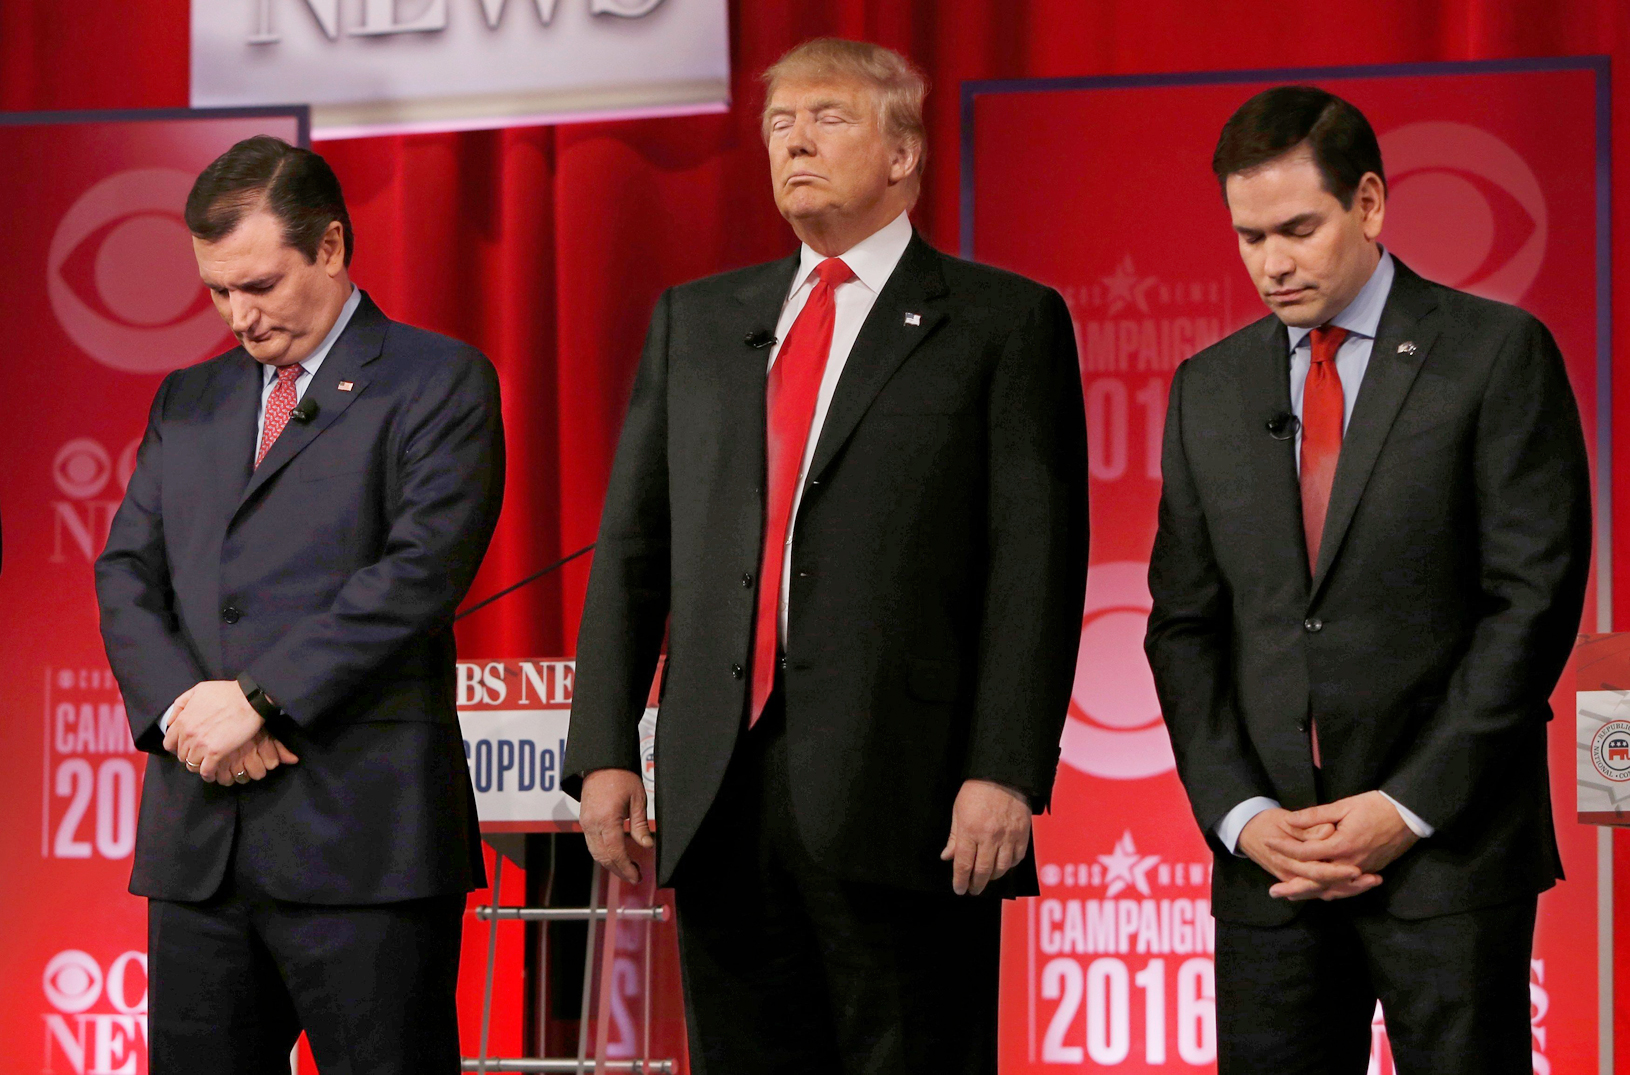 As Super Tuesday looms, Ted Cruz and Marco Rubio have lost valuable ground to Donald Trump